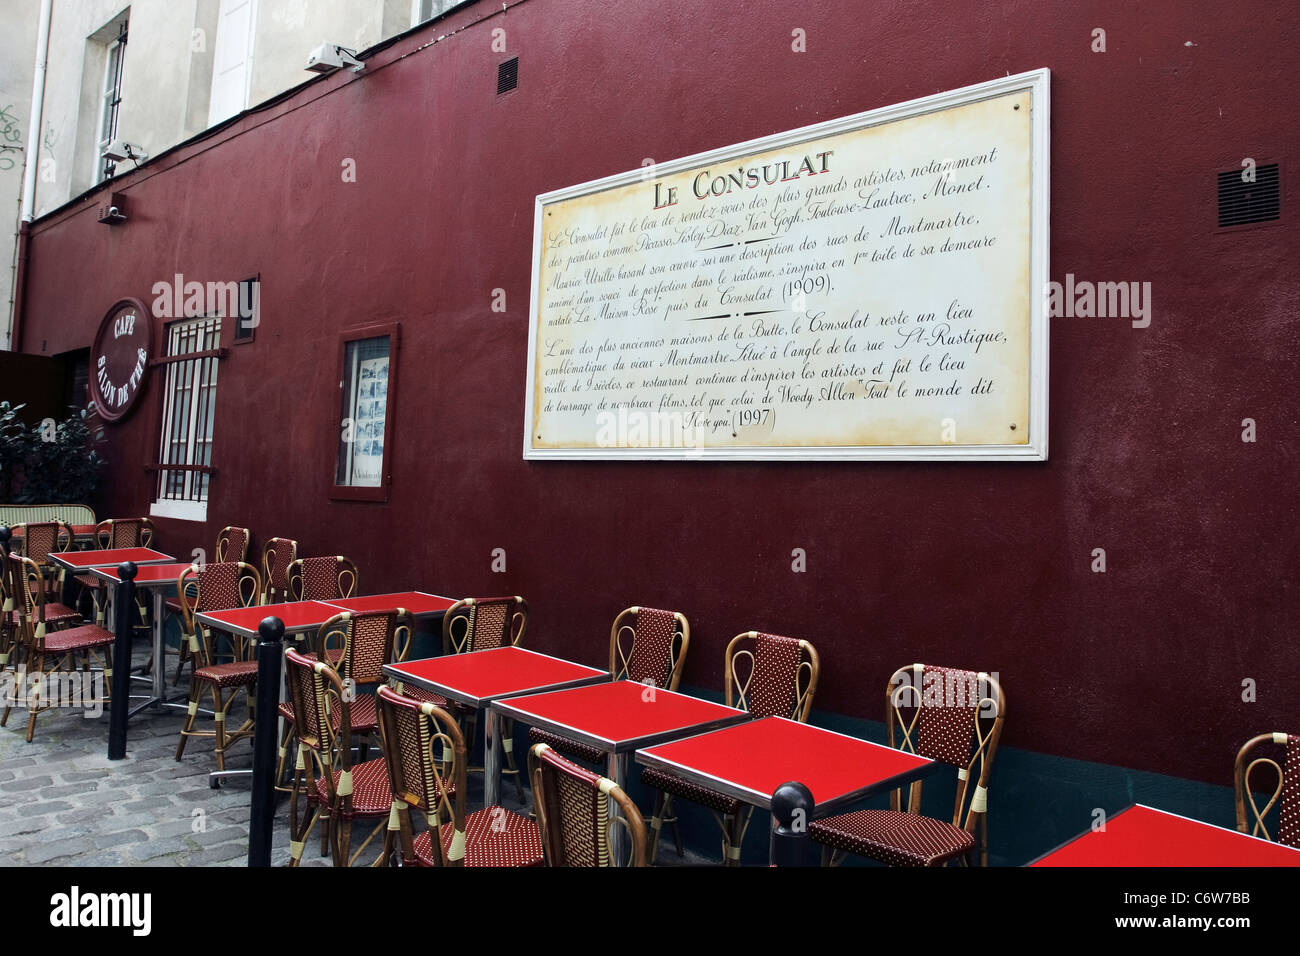 A plaque on a wall in Montmartre, Paris explaining (in French) the history and claims to fame of Le Consulat cafe and restaurant Stock Photo